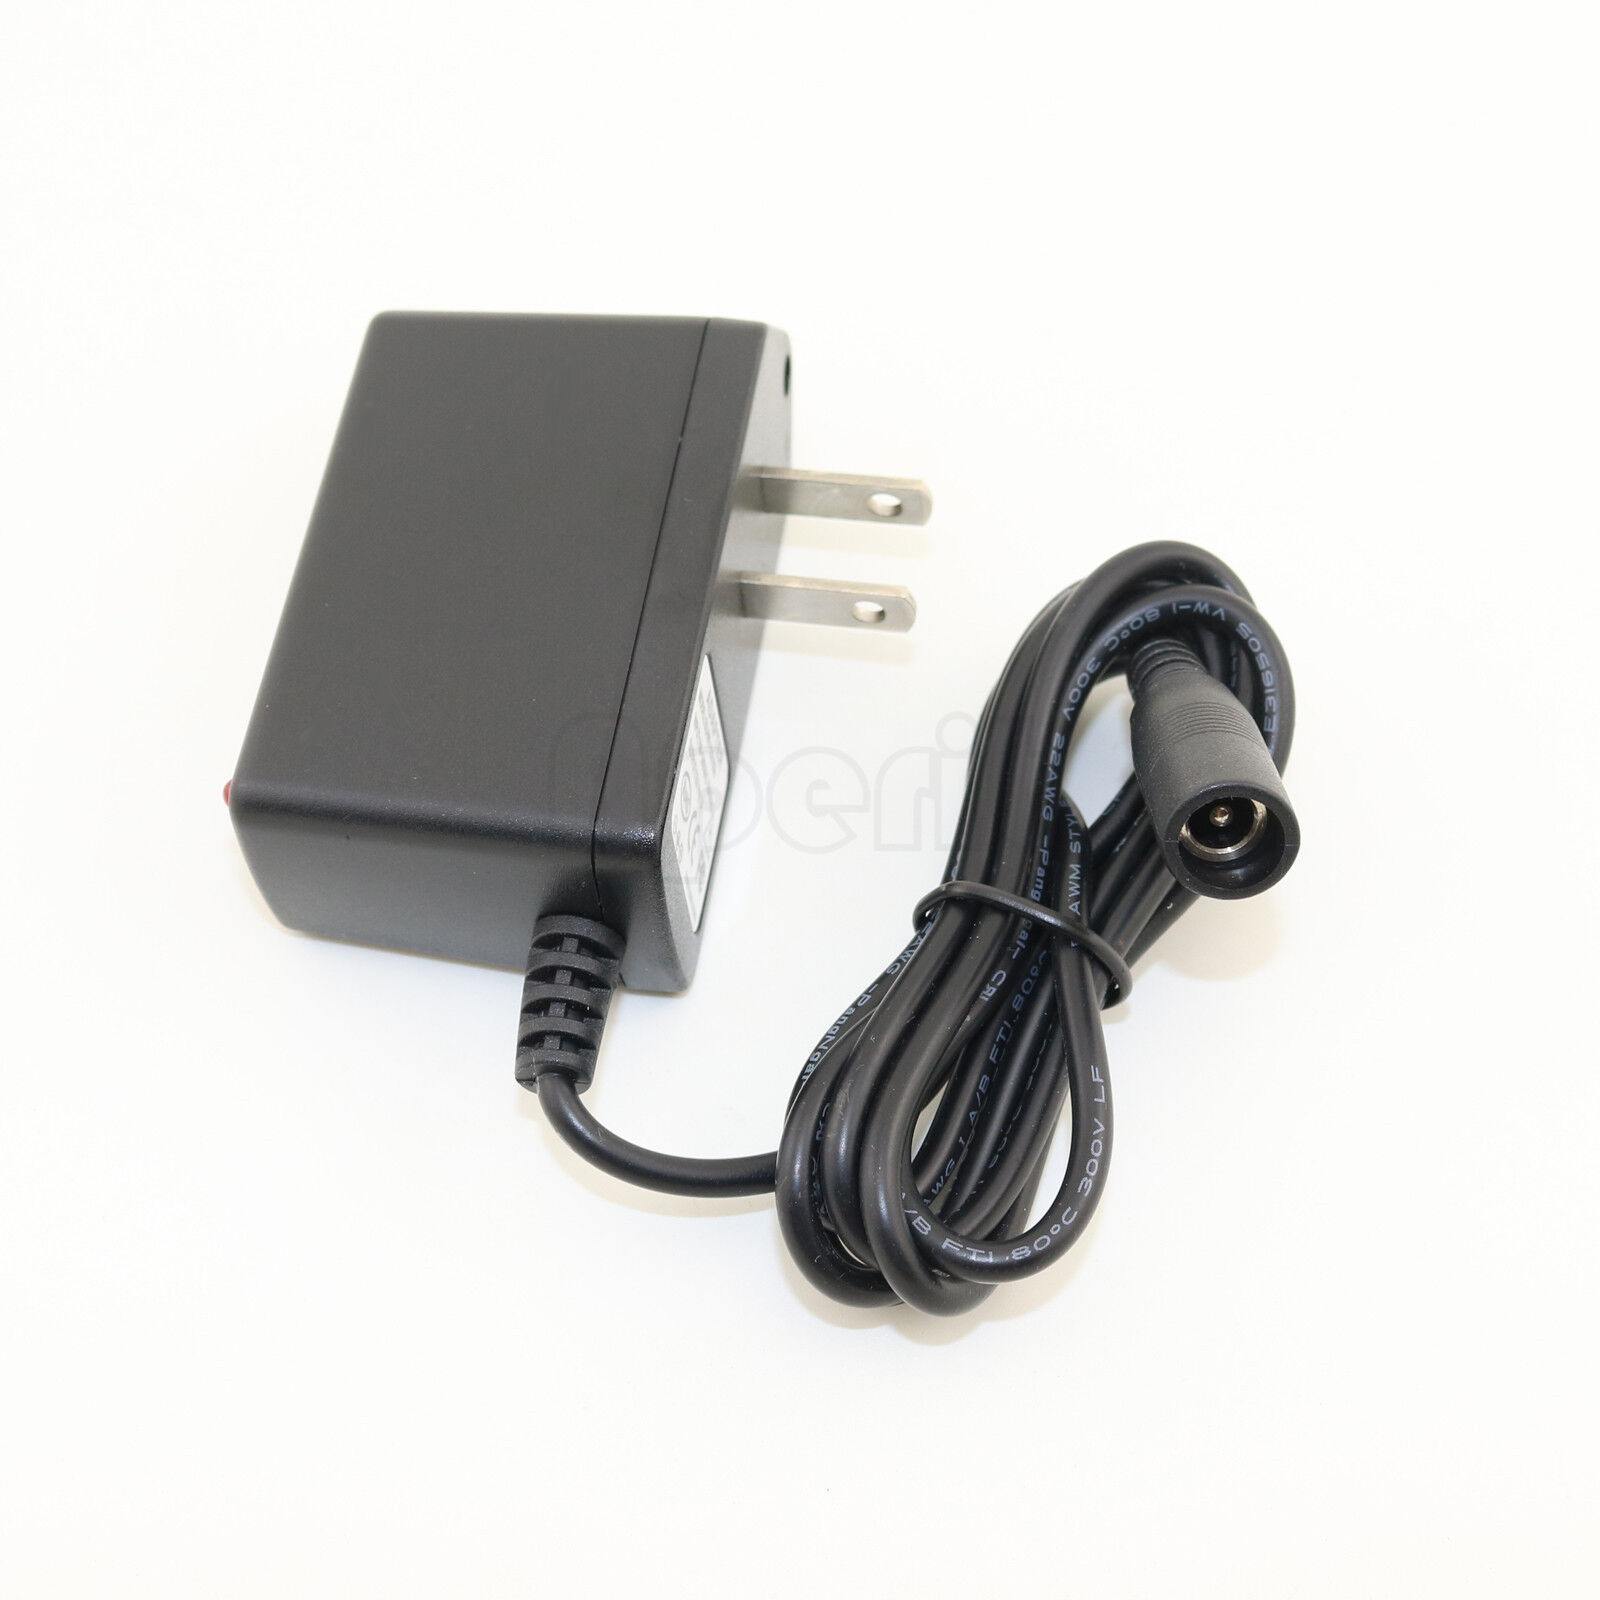 AC Adapter For BOSS BR-864 BR864 8-Track Recorder Power Supply Charger Brand Unbranded Effects Type Power Supplies MPN